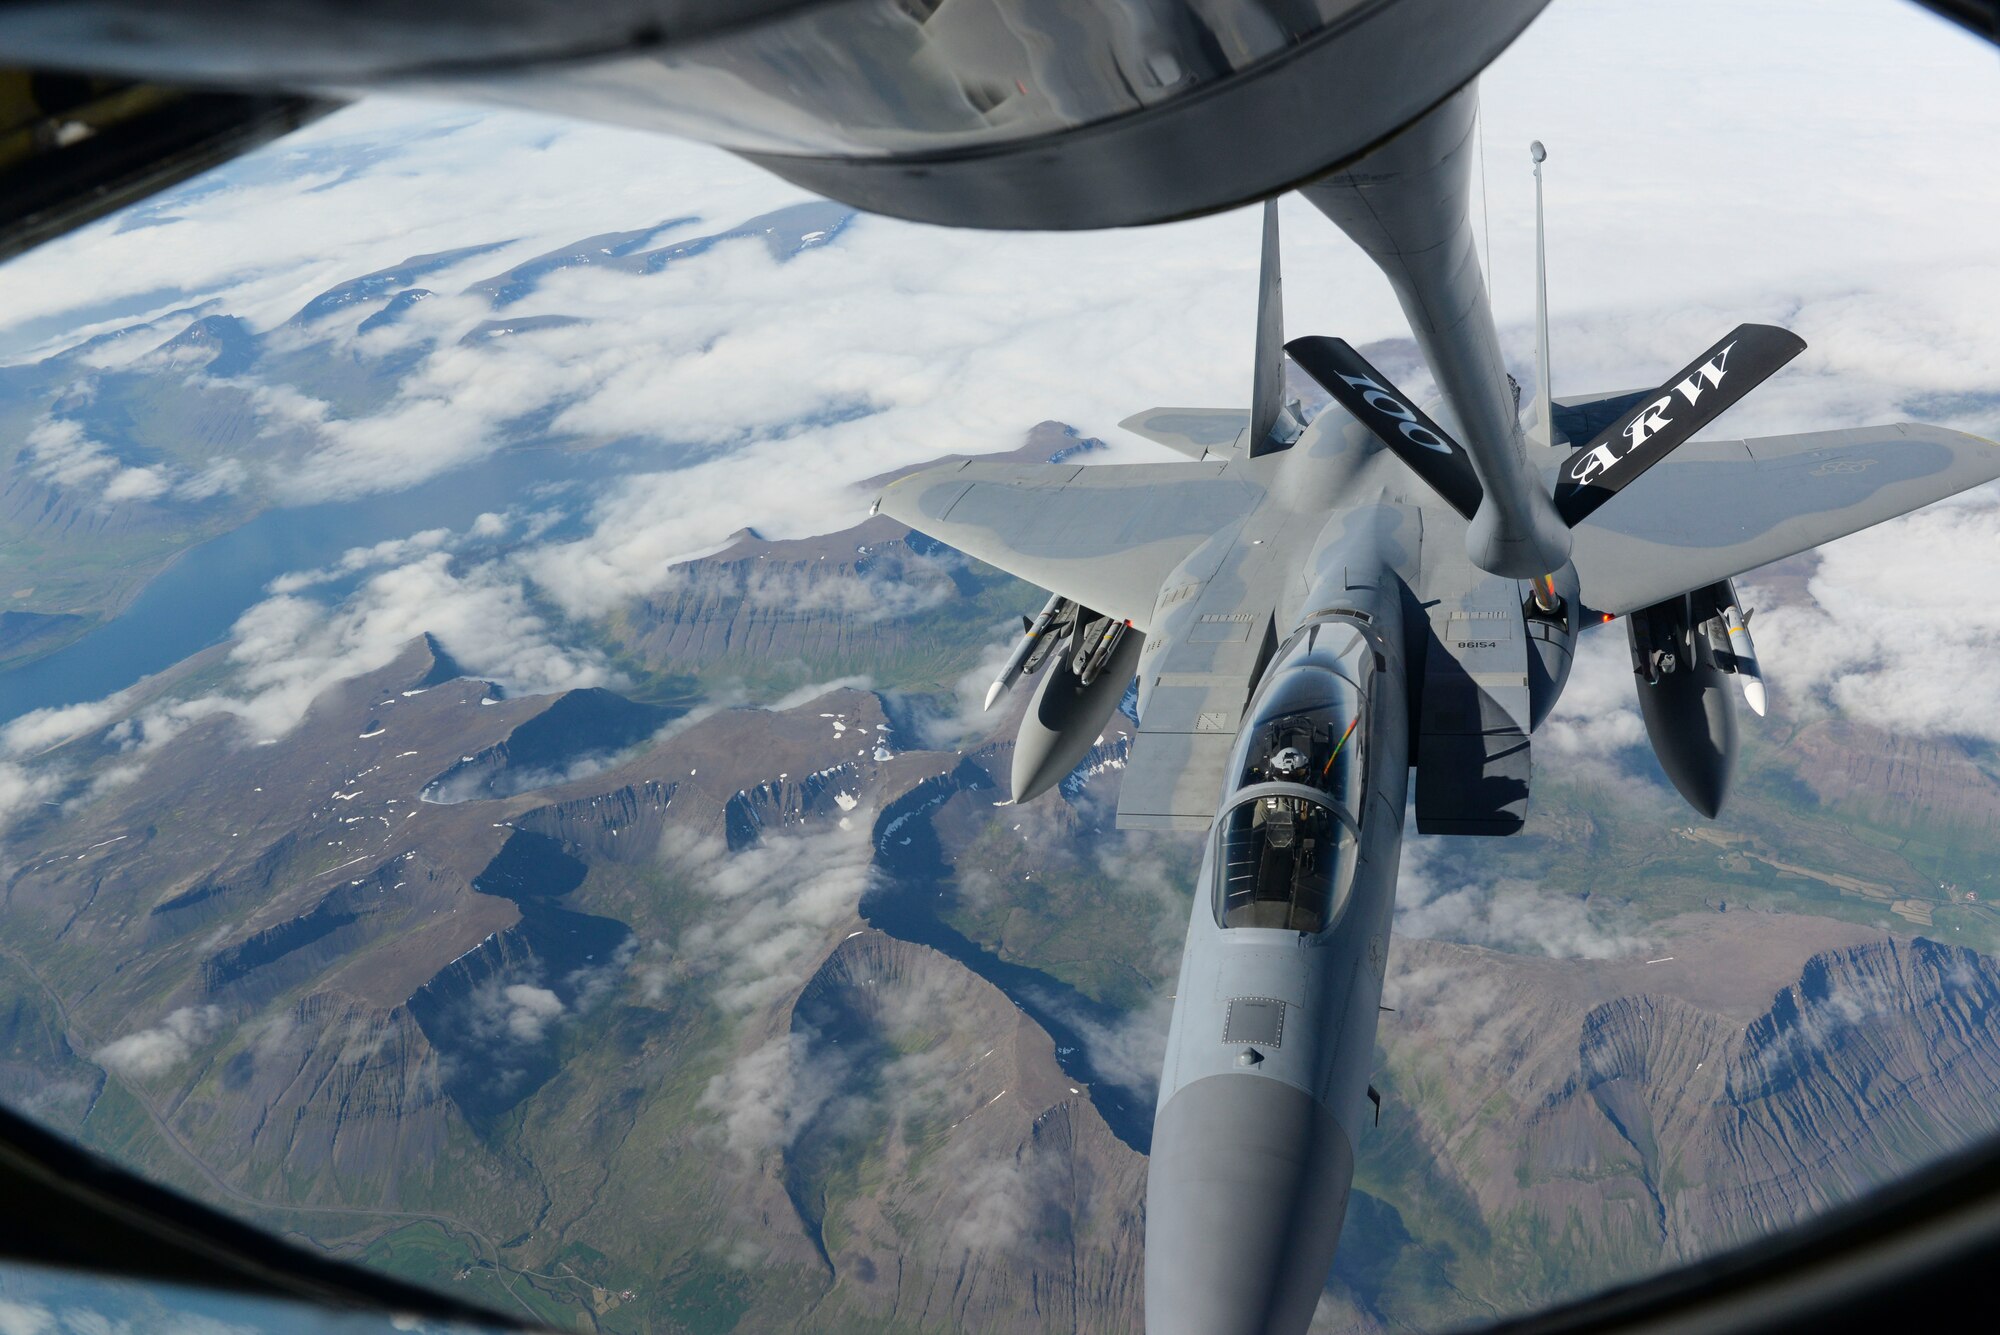 A U.S. Air Force F-15C Eagle assigned to the 493rd Expeditionary Fighter Squadron receives fuel from a KC-135 Stratotanker assigned to the 351st Air Refueling Squadron over Iceland, Aug. 10, 2018. The 100th Air Refueling Wing supported deployed Airmen and aircraft from the 48th Fighter Wing in support of NATO’s Icelandic Air Surveillance mission.  The U.S. has conducted the NATO mission in Iceland annually since 2008. (U.S. Air Force photo by Airman 1st Class Alexandria Lee)